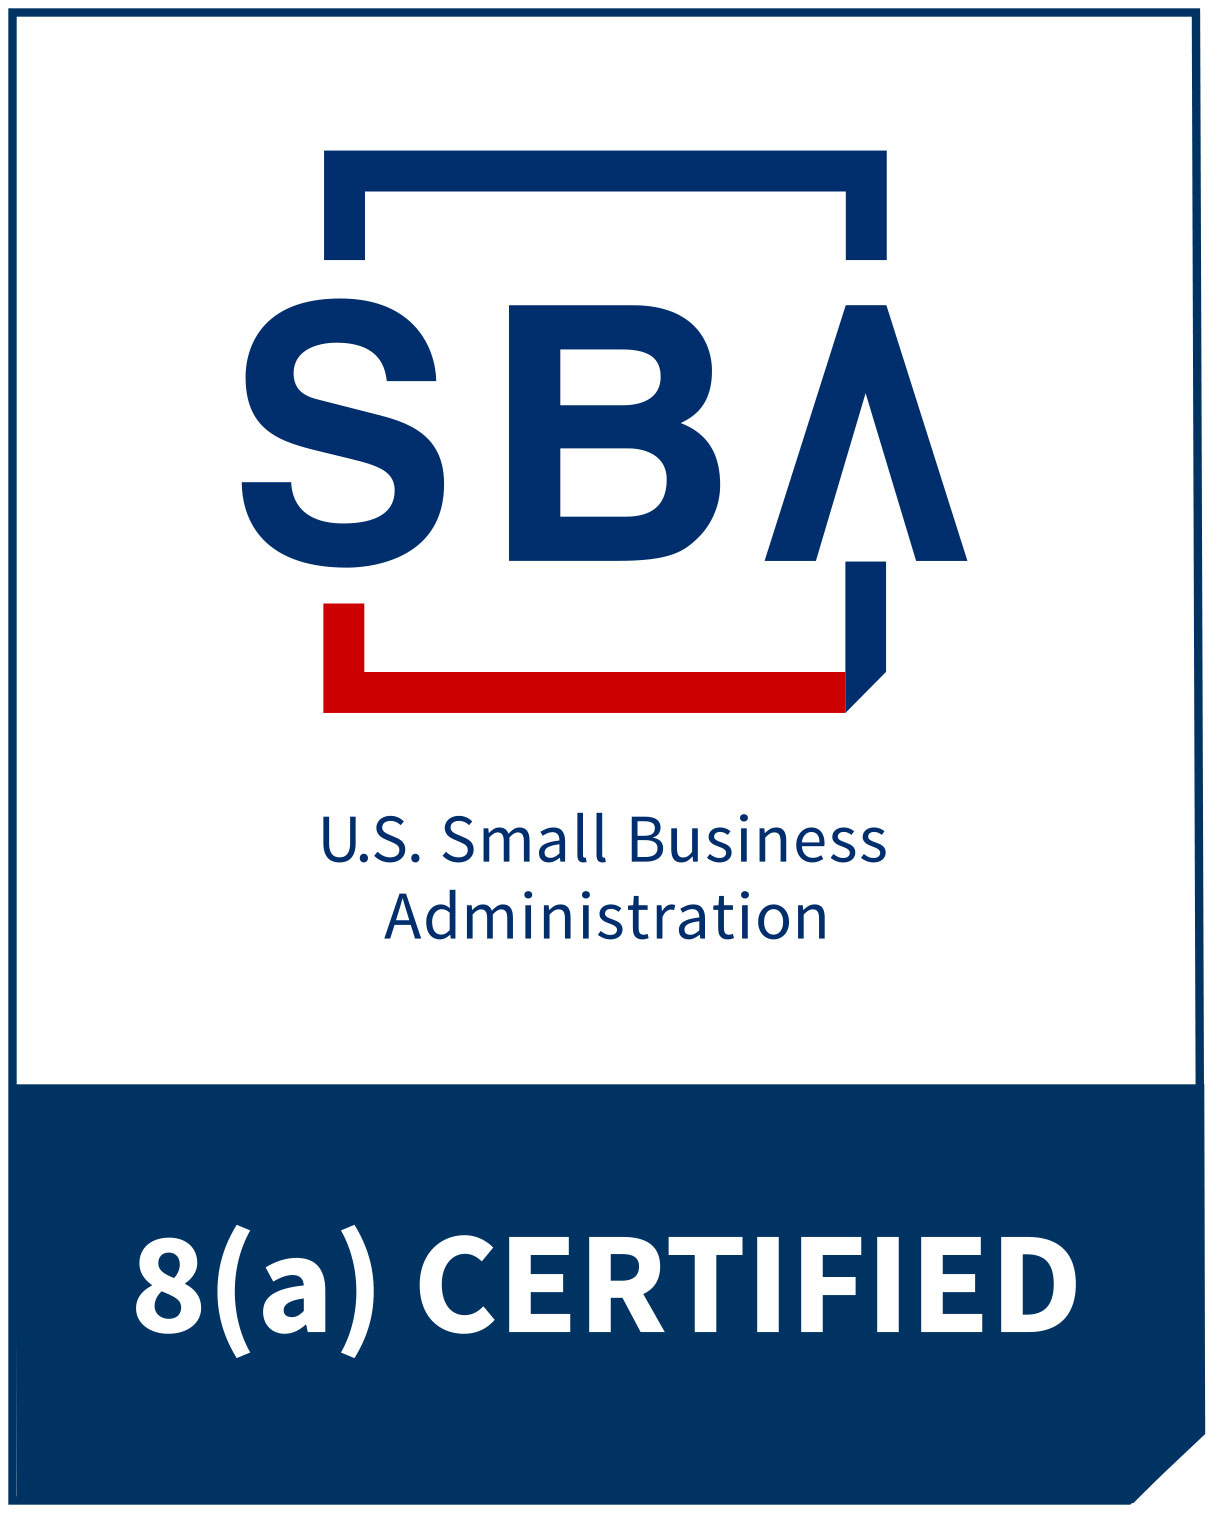 U.S. Small Business Administration 8(a) certified logo